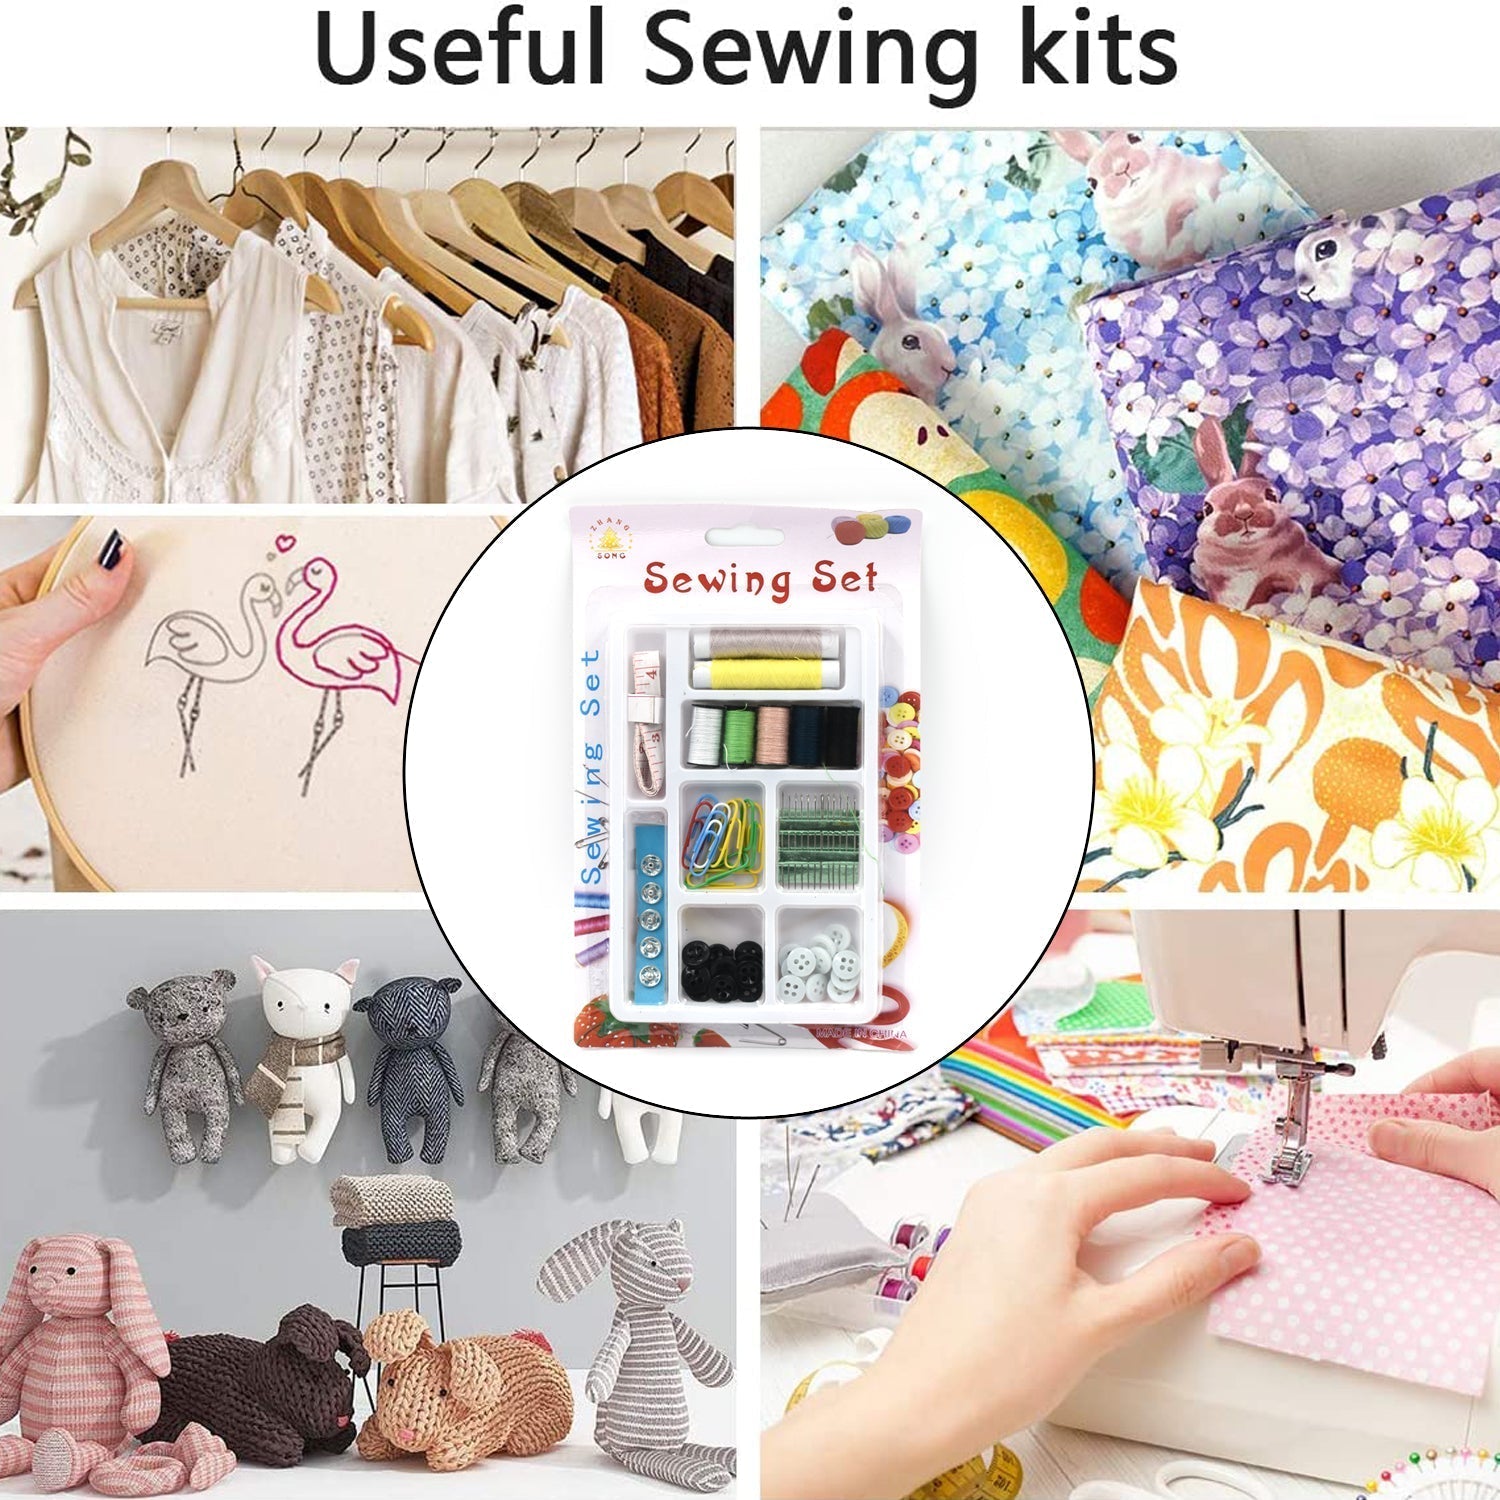 6051 62 Pc Sewing Set used for sewing of clothes and fabrics including all home purposes. DeoDap